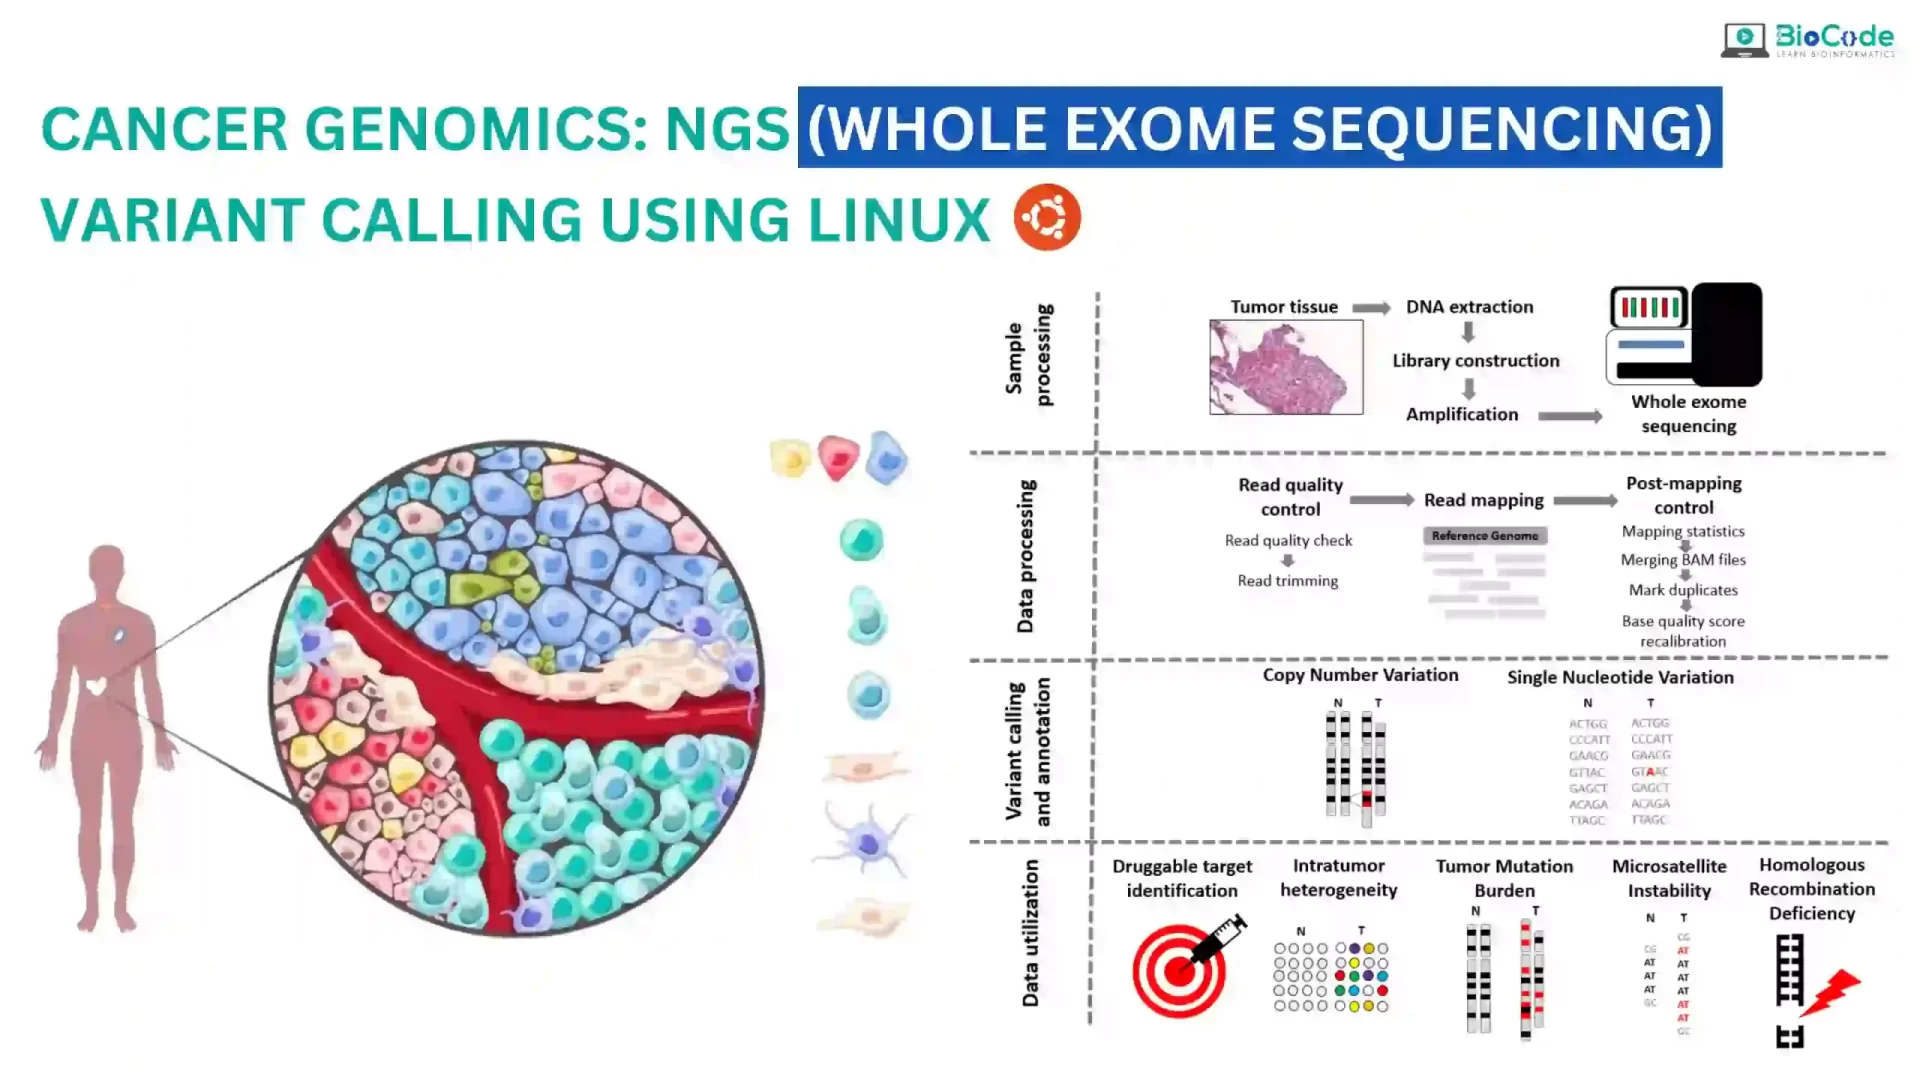 Cancer Genomics: NGS (Whole Exome Sequencing) Variant Calling Using Linux